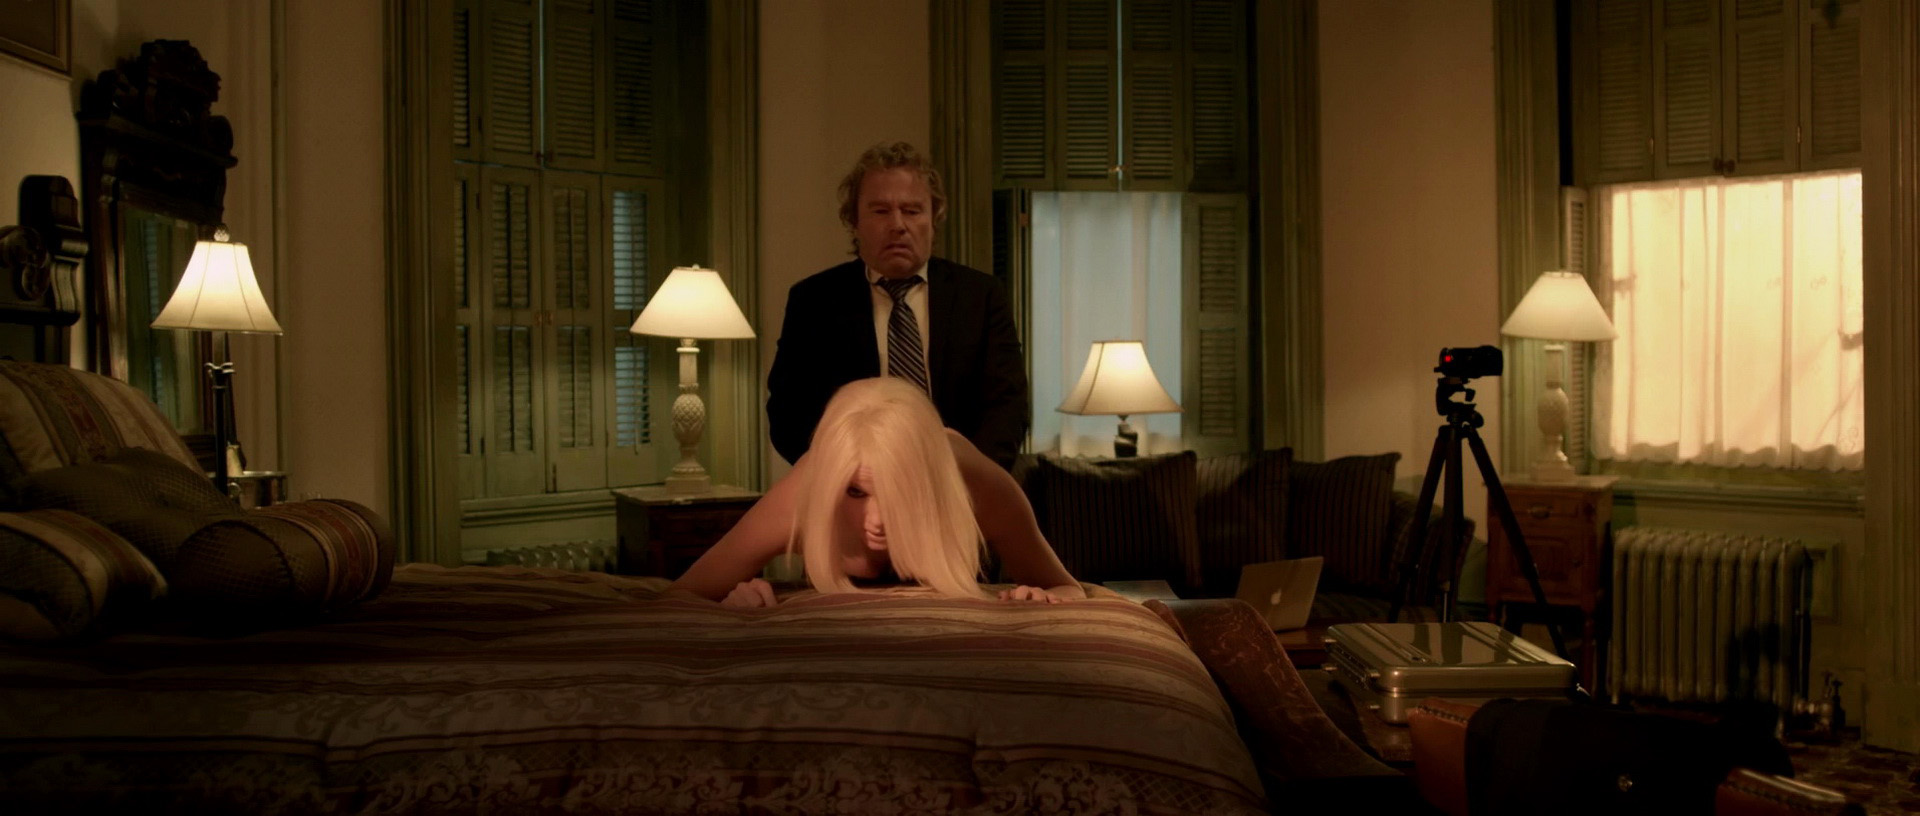 High-Res Screencaps from Gillian Jacobs’ Sex Scene in The Lookalike (2014)